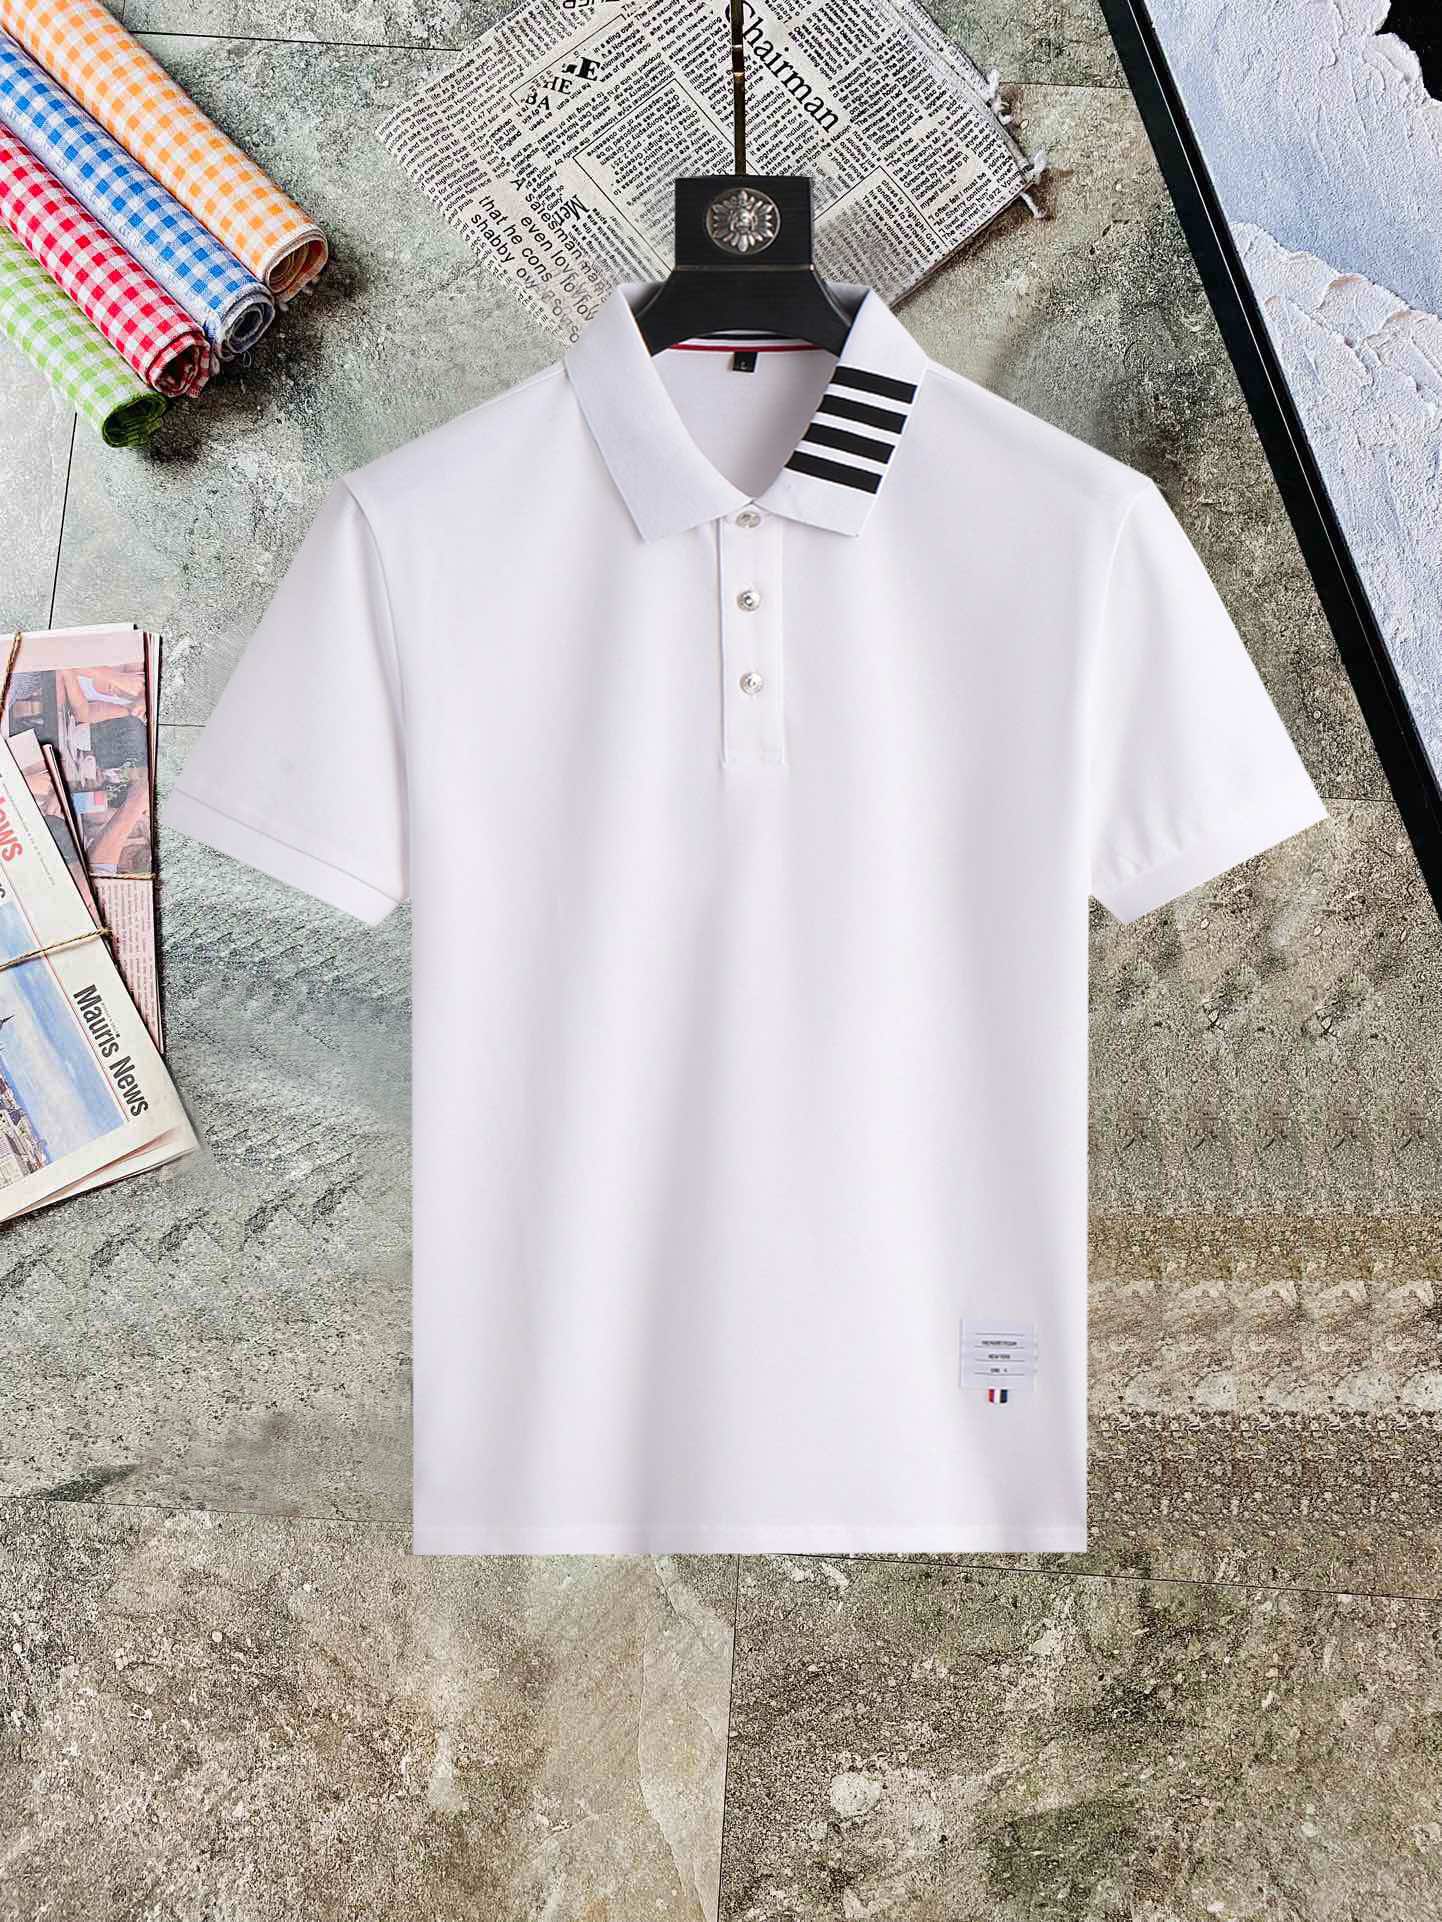 Thom Browne Clothing Polo T-Shirt Summer Collection Short Sleeve